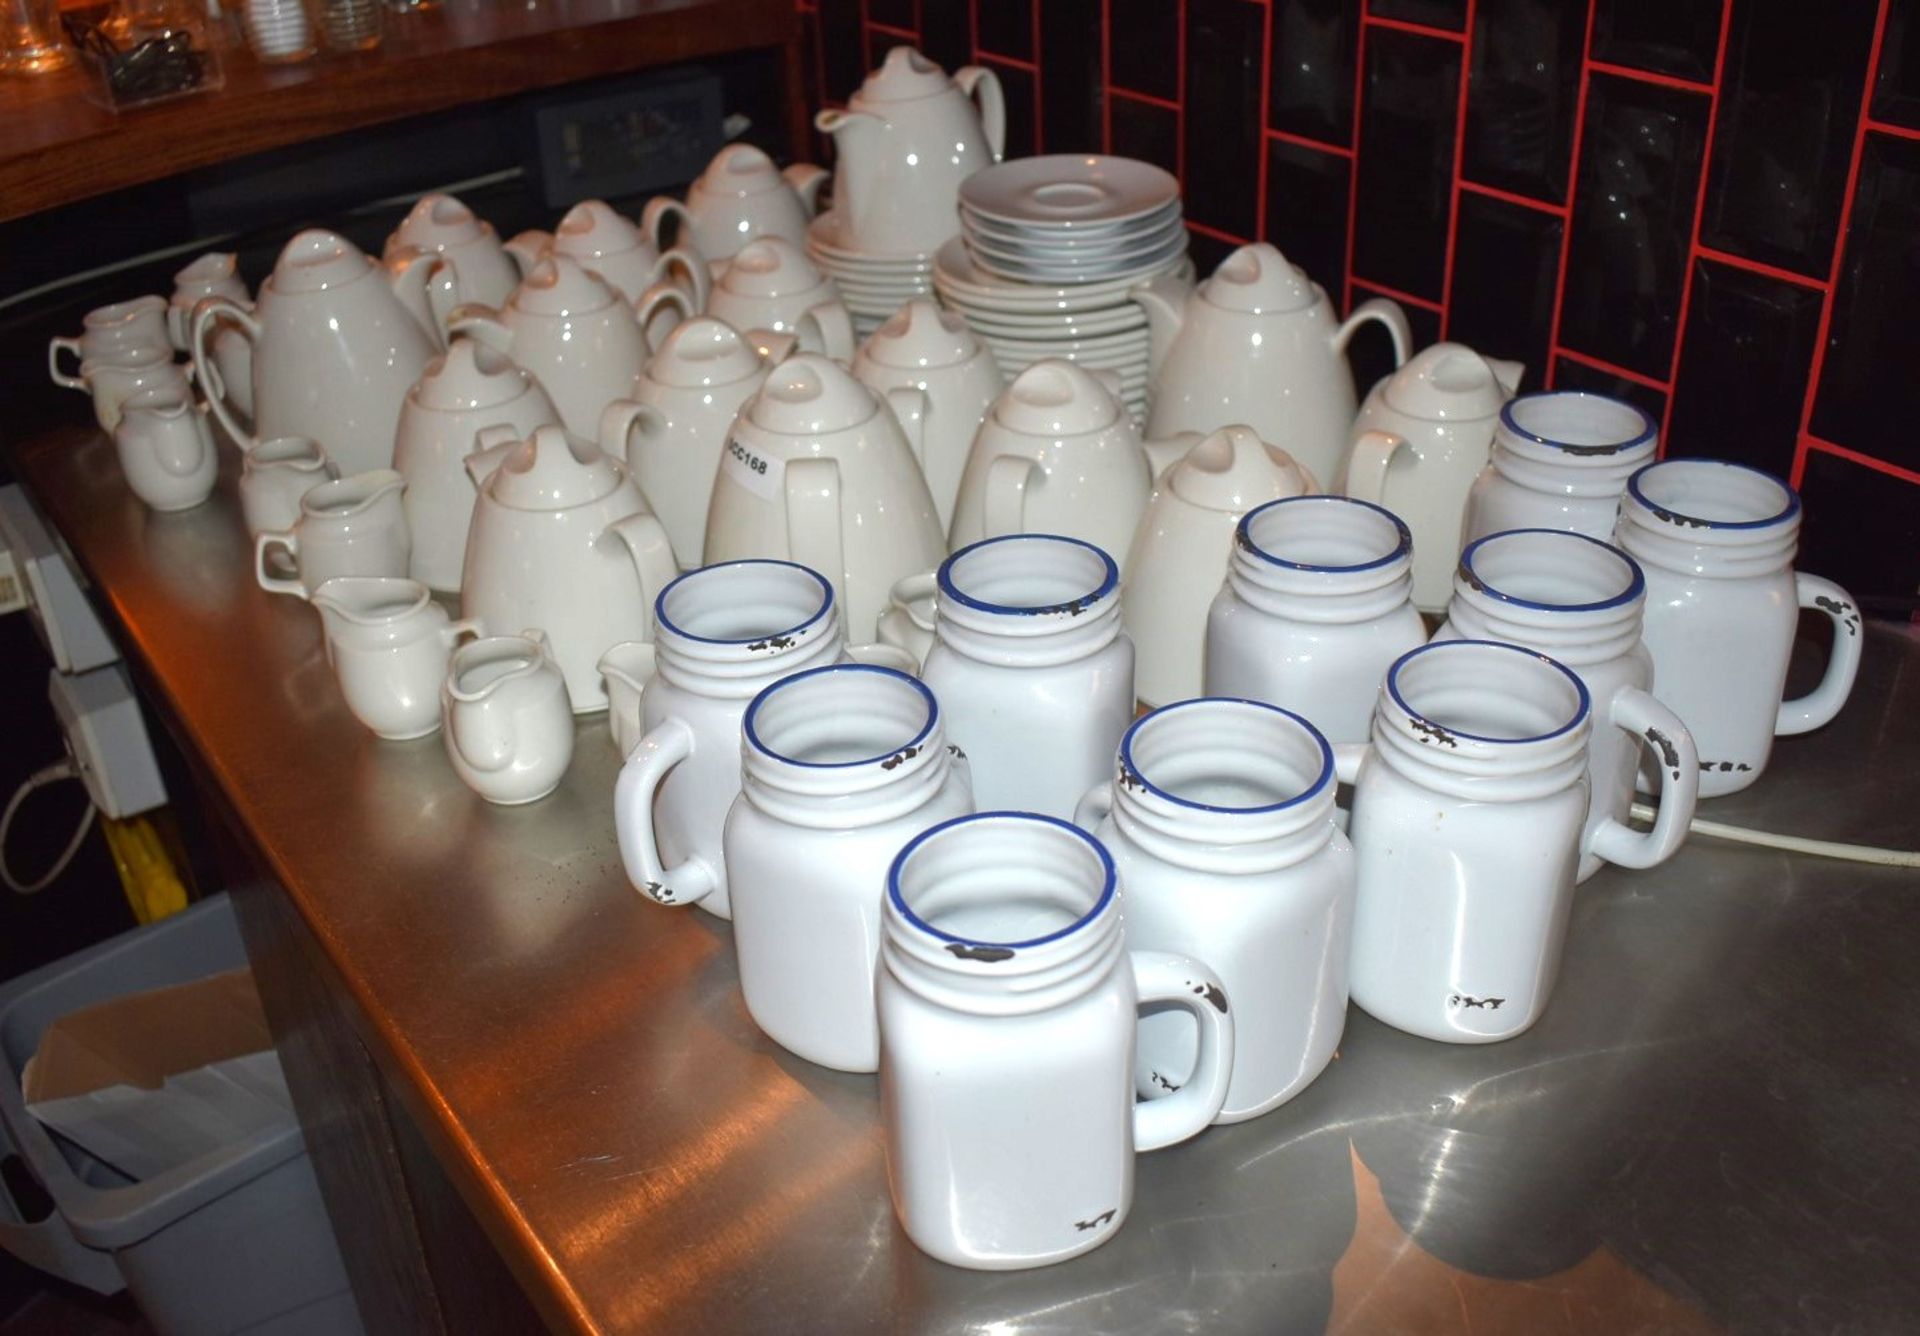 Assorted Collection Ceramic Coffee/Teaware to Include 80 Items - Teapots, Milk Jugs, Saucers & More - Image 2 of 10